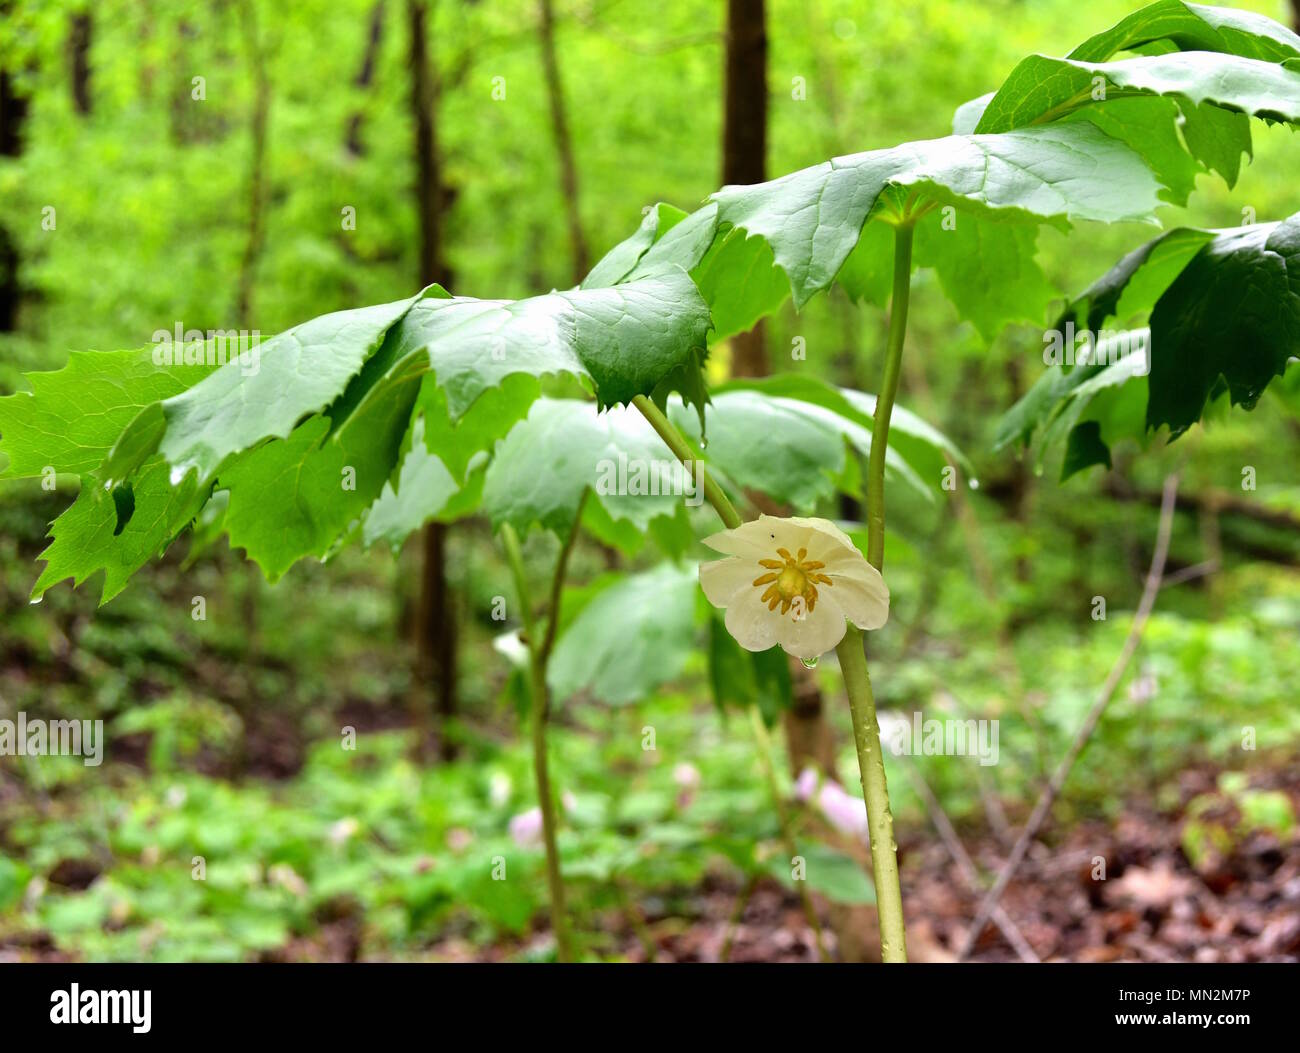 Scenic view of a mayapple flower and umbrella shaped leaves. Stock Photo